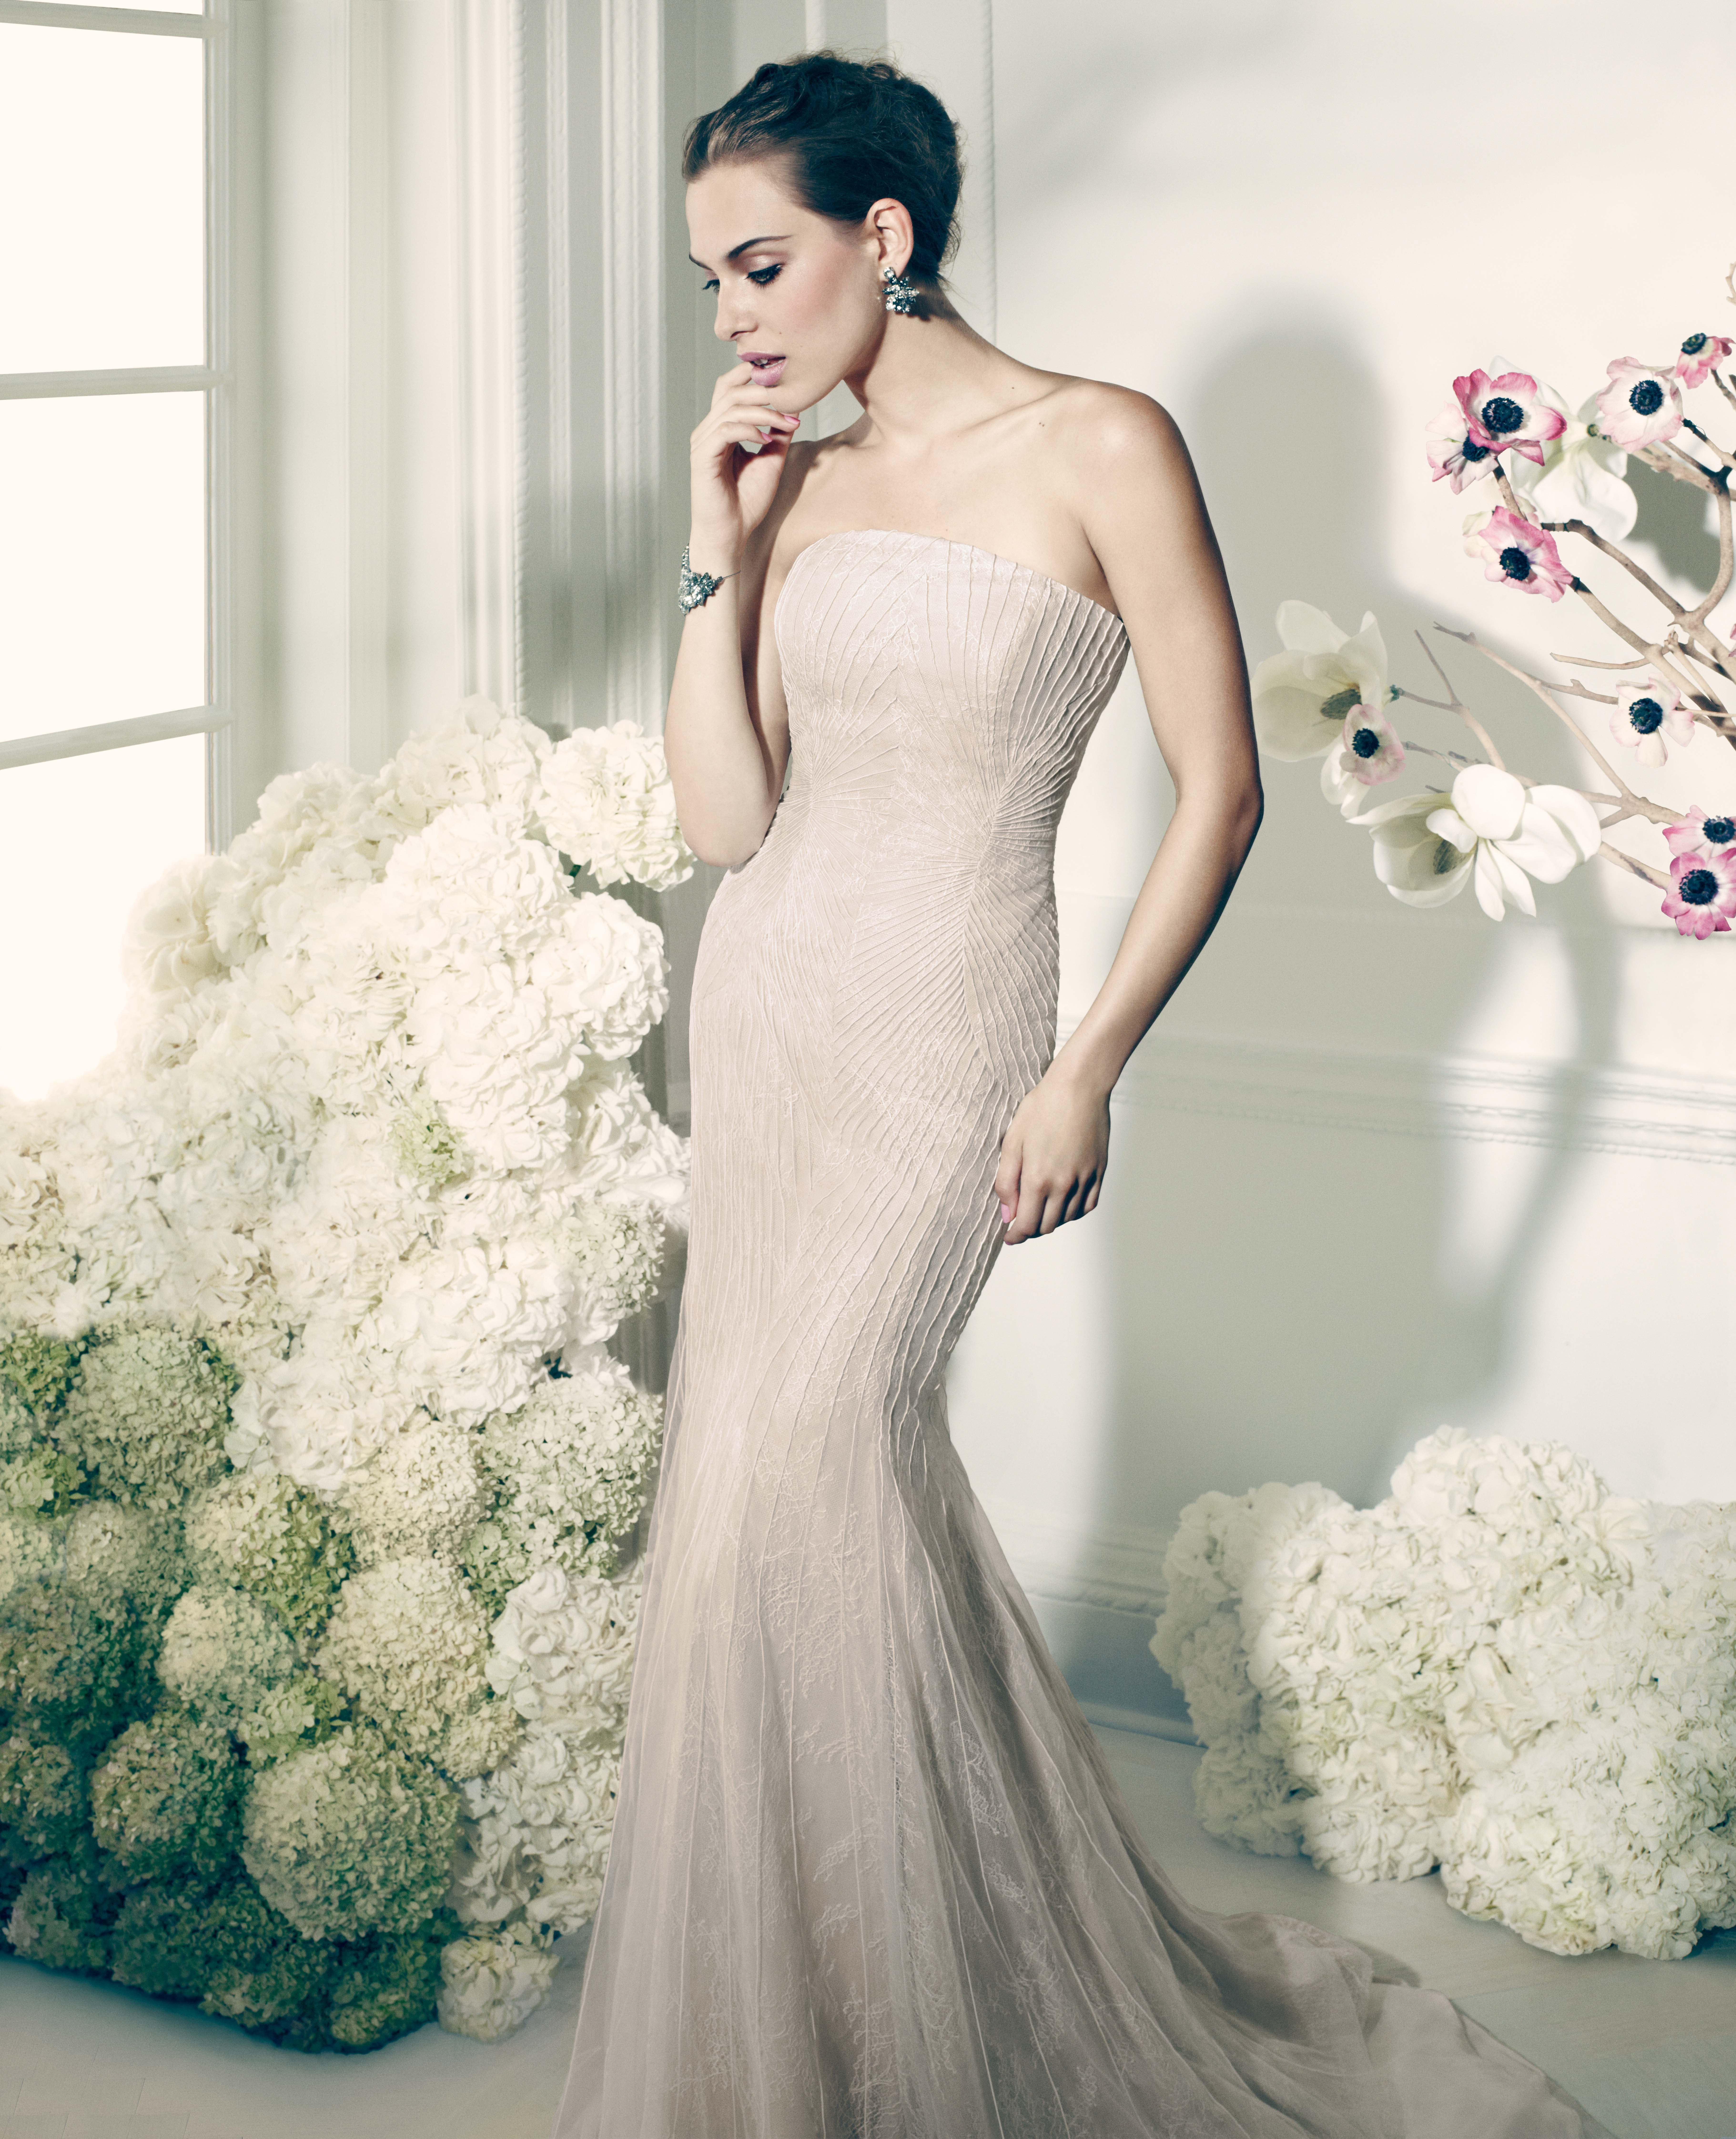 Zac Posen Teams Up With David's Bridal for Gown Collection